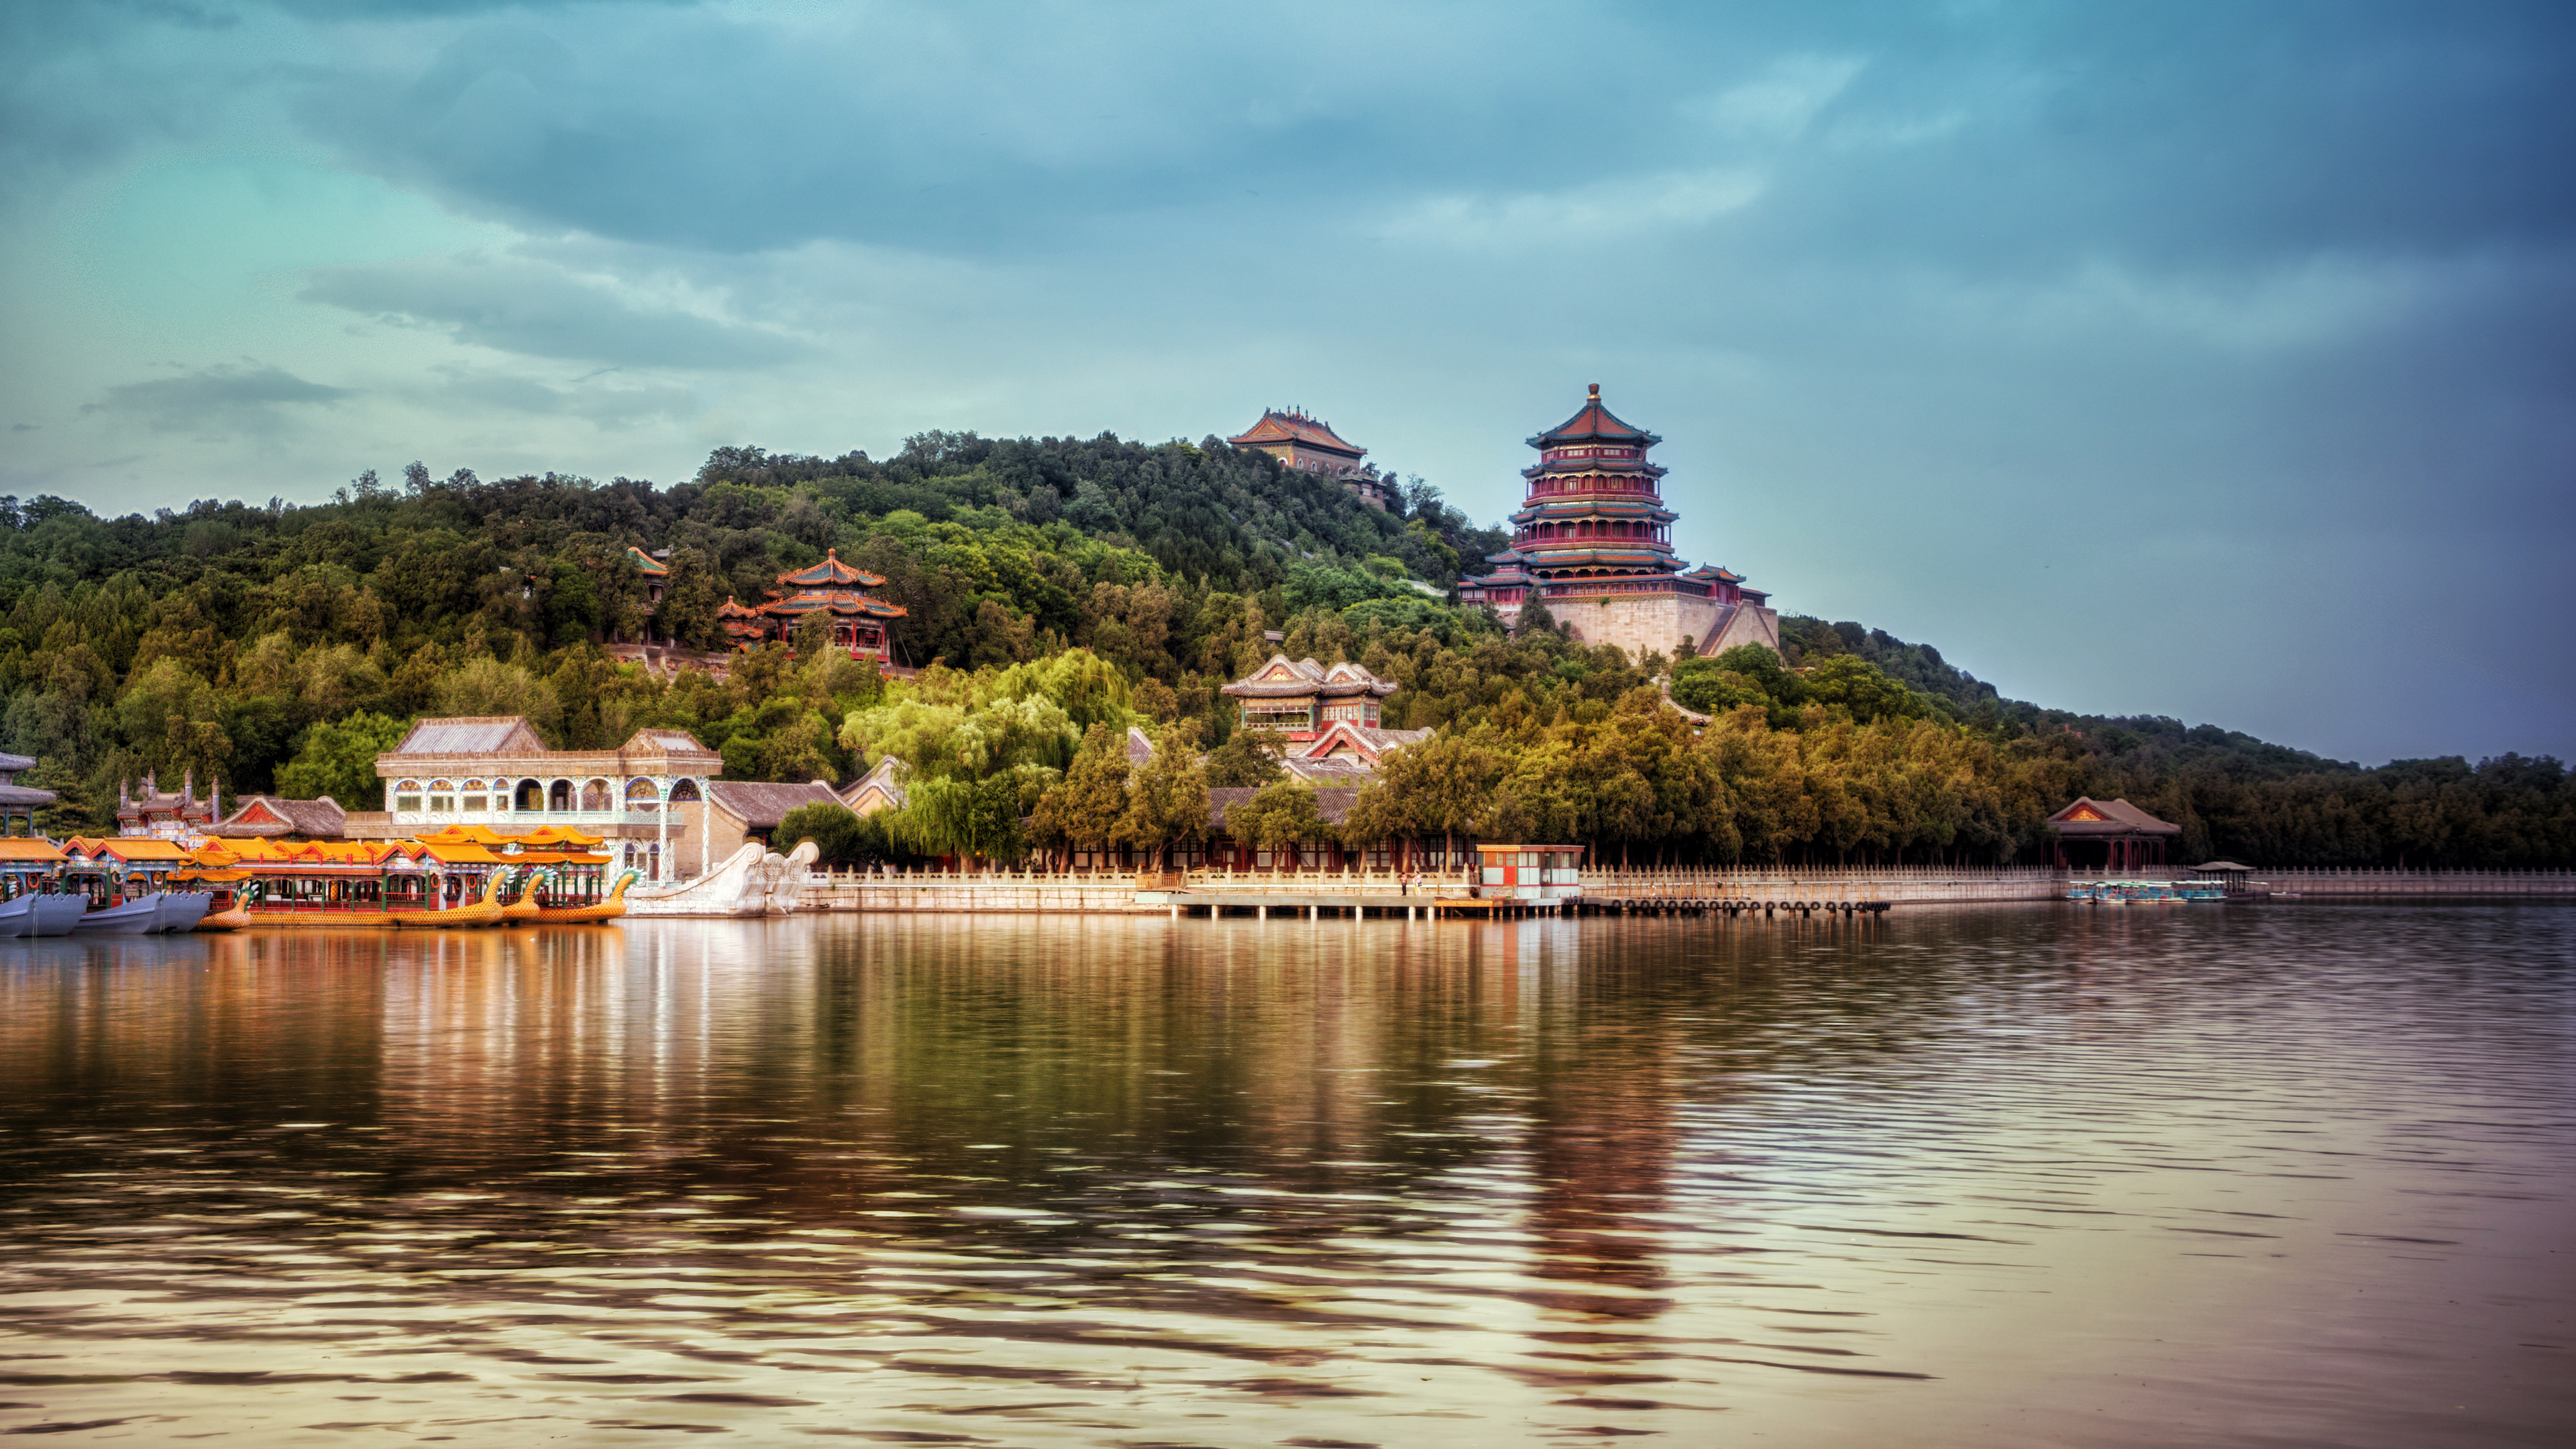 General 3840x2160 China photography Trey Ratcliff Beijing Summer Palace water trees clouds architecture